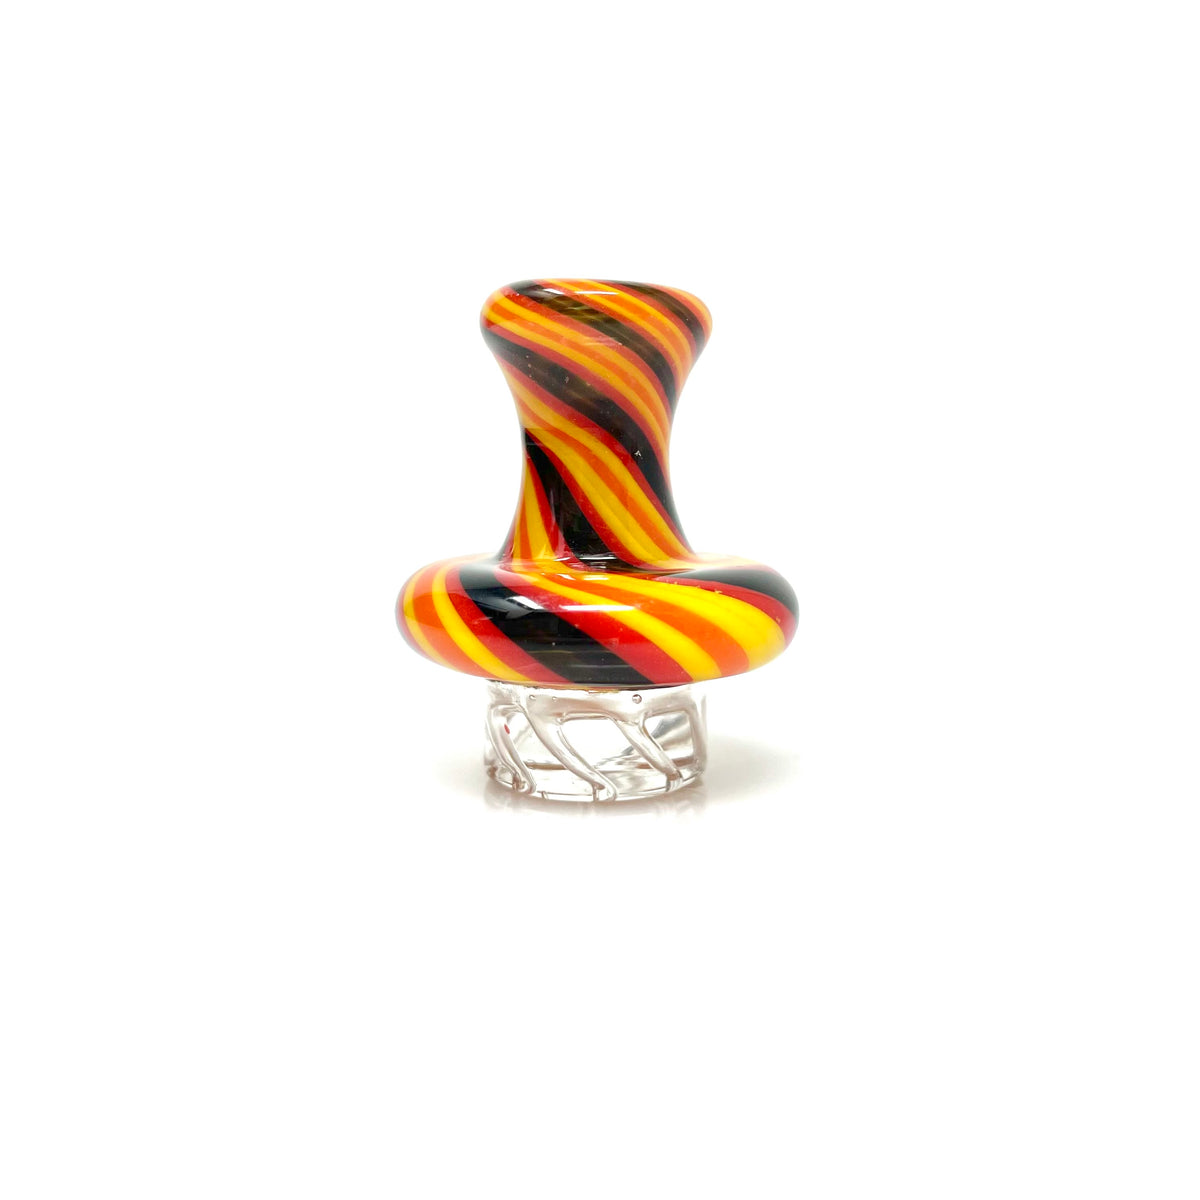 AFM Lolli Turbo Glass Spinner Carb Cap + 2 Pearls